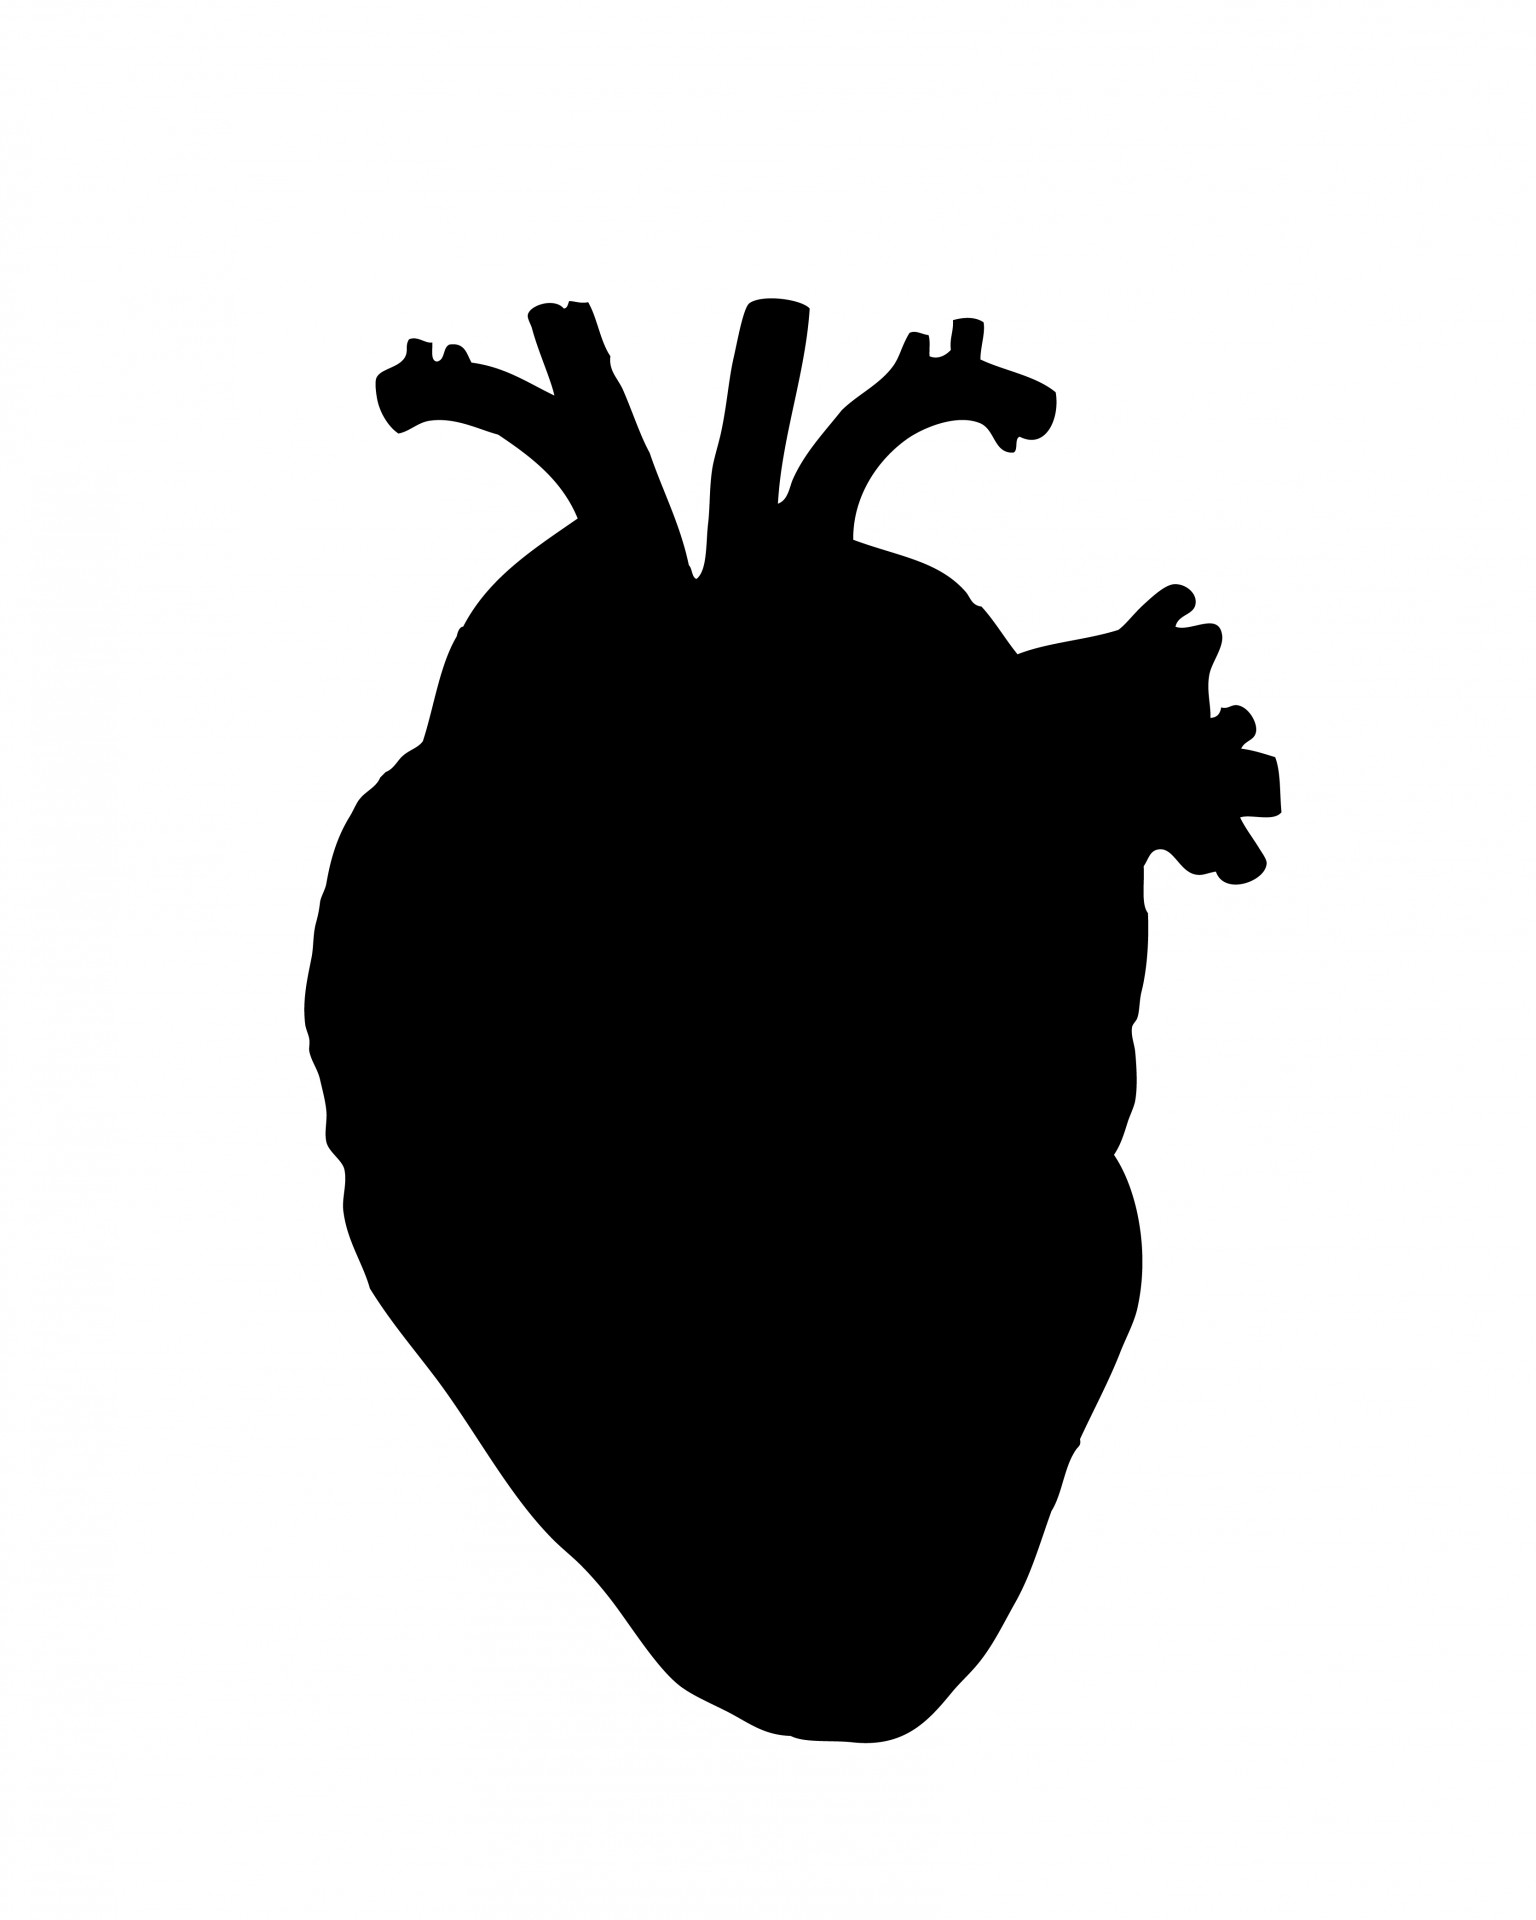 human heart clipart black and white - photo #19